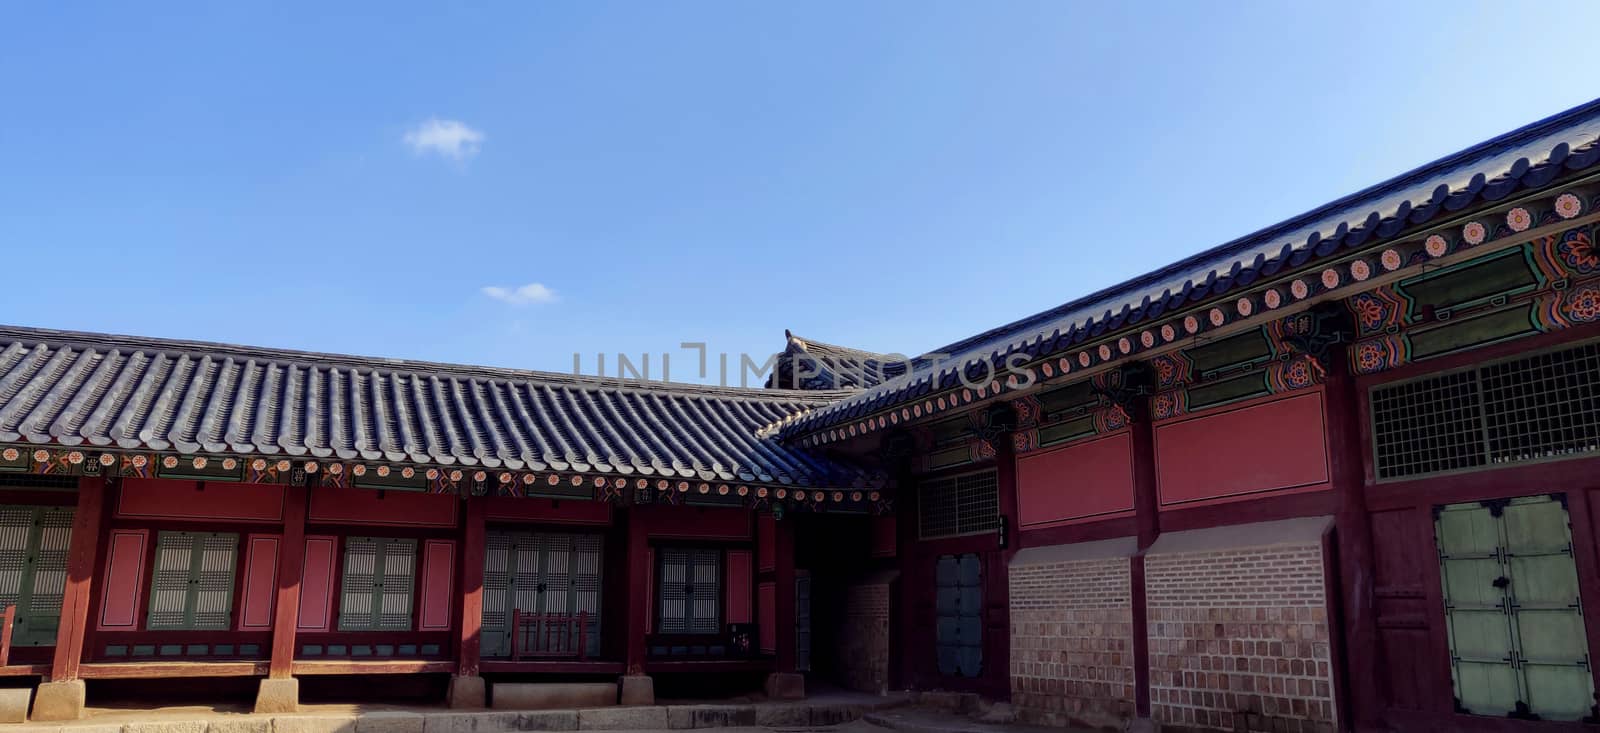 Ancient Korean structure inside the ancient Gyeongbokgung Palace, Seoul, Korea during bright day and blue sky